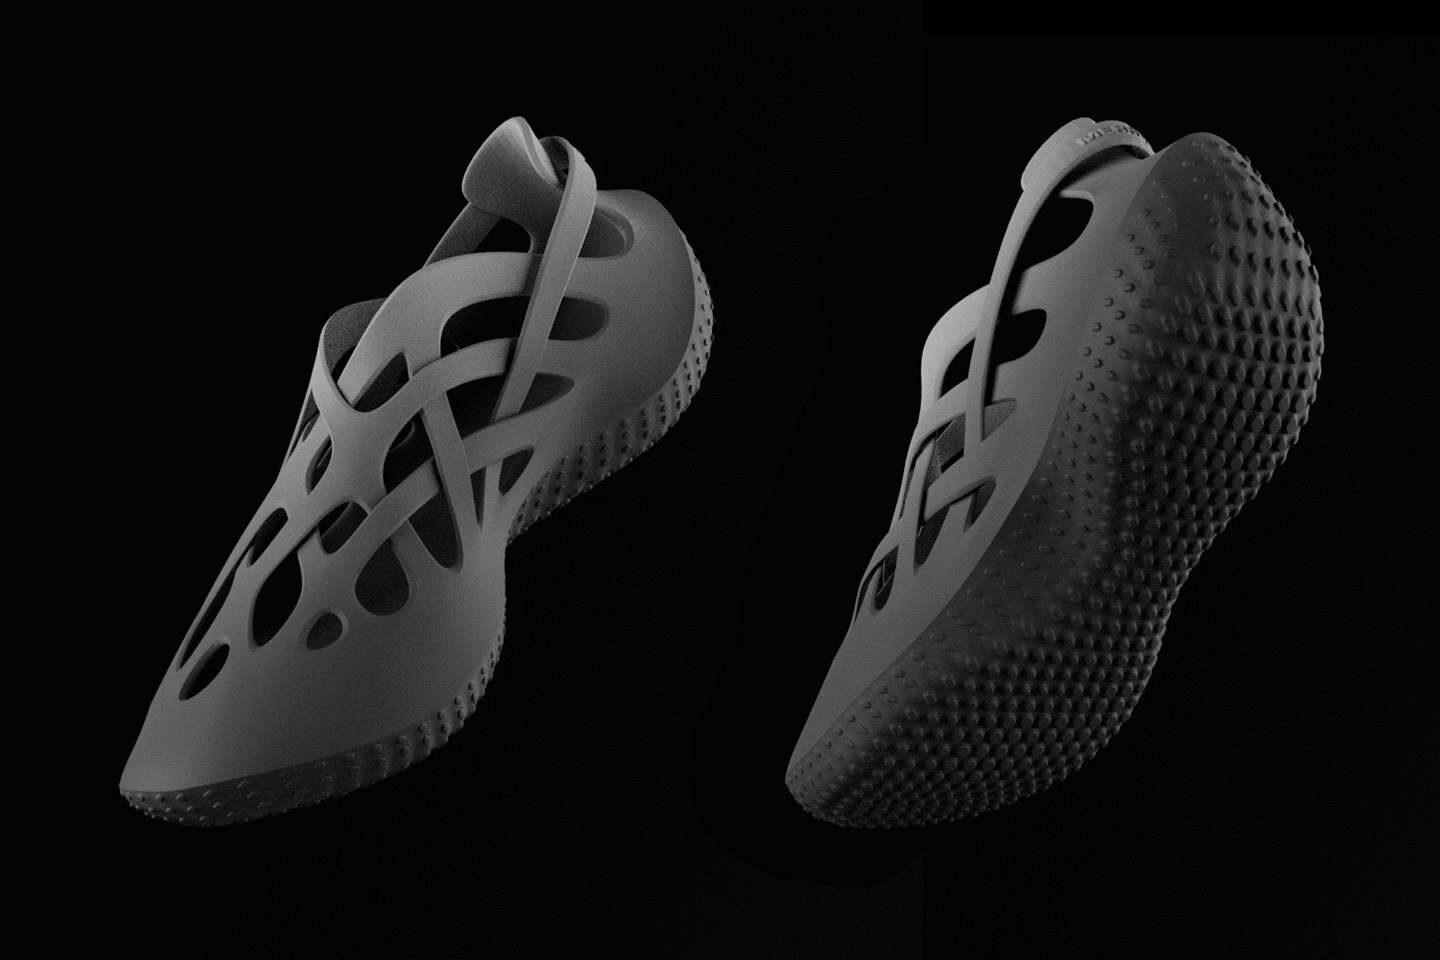 #This flexible single-material hiking shoe can only be mass-manufactured using 3D printing technology